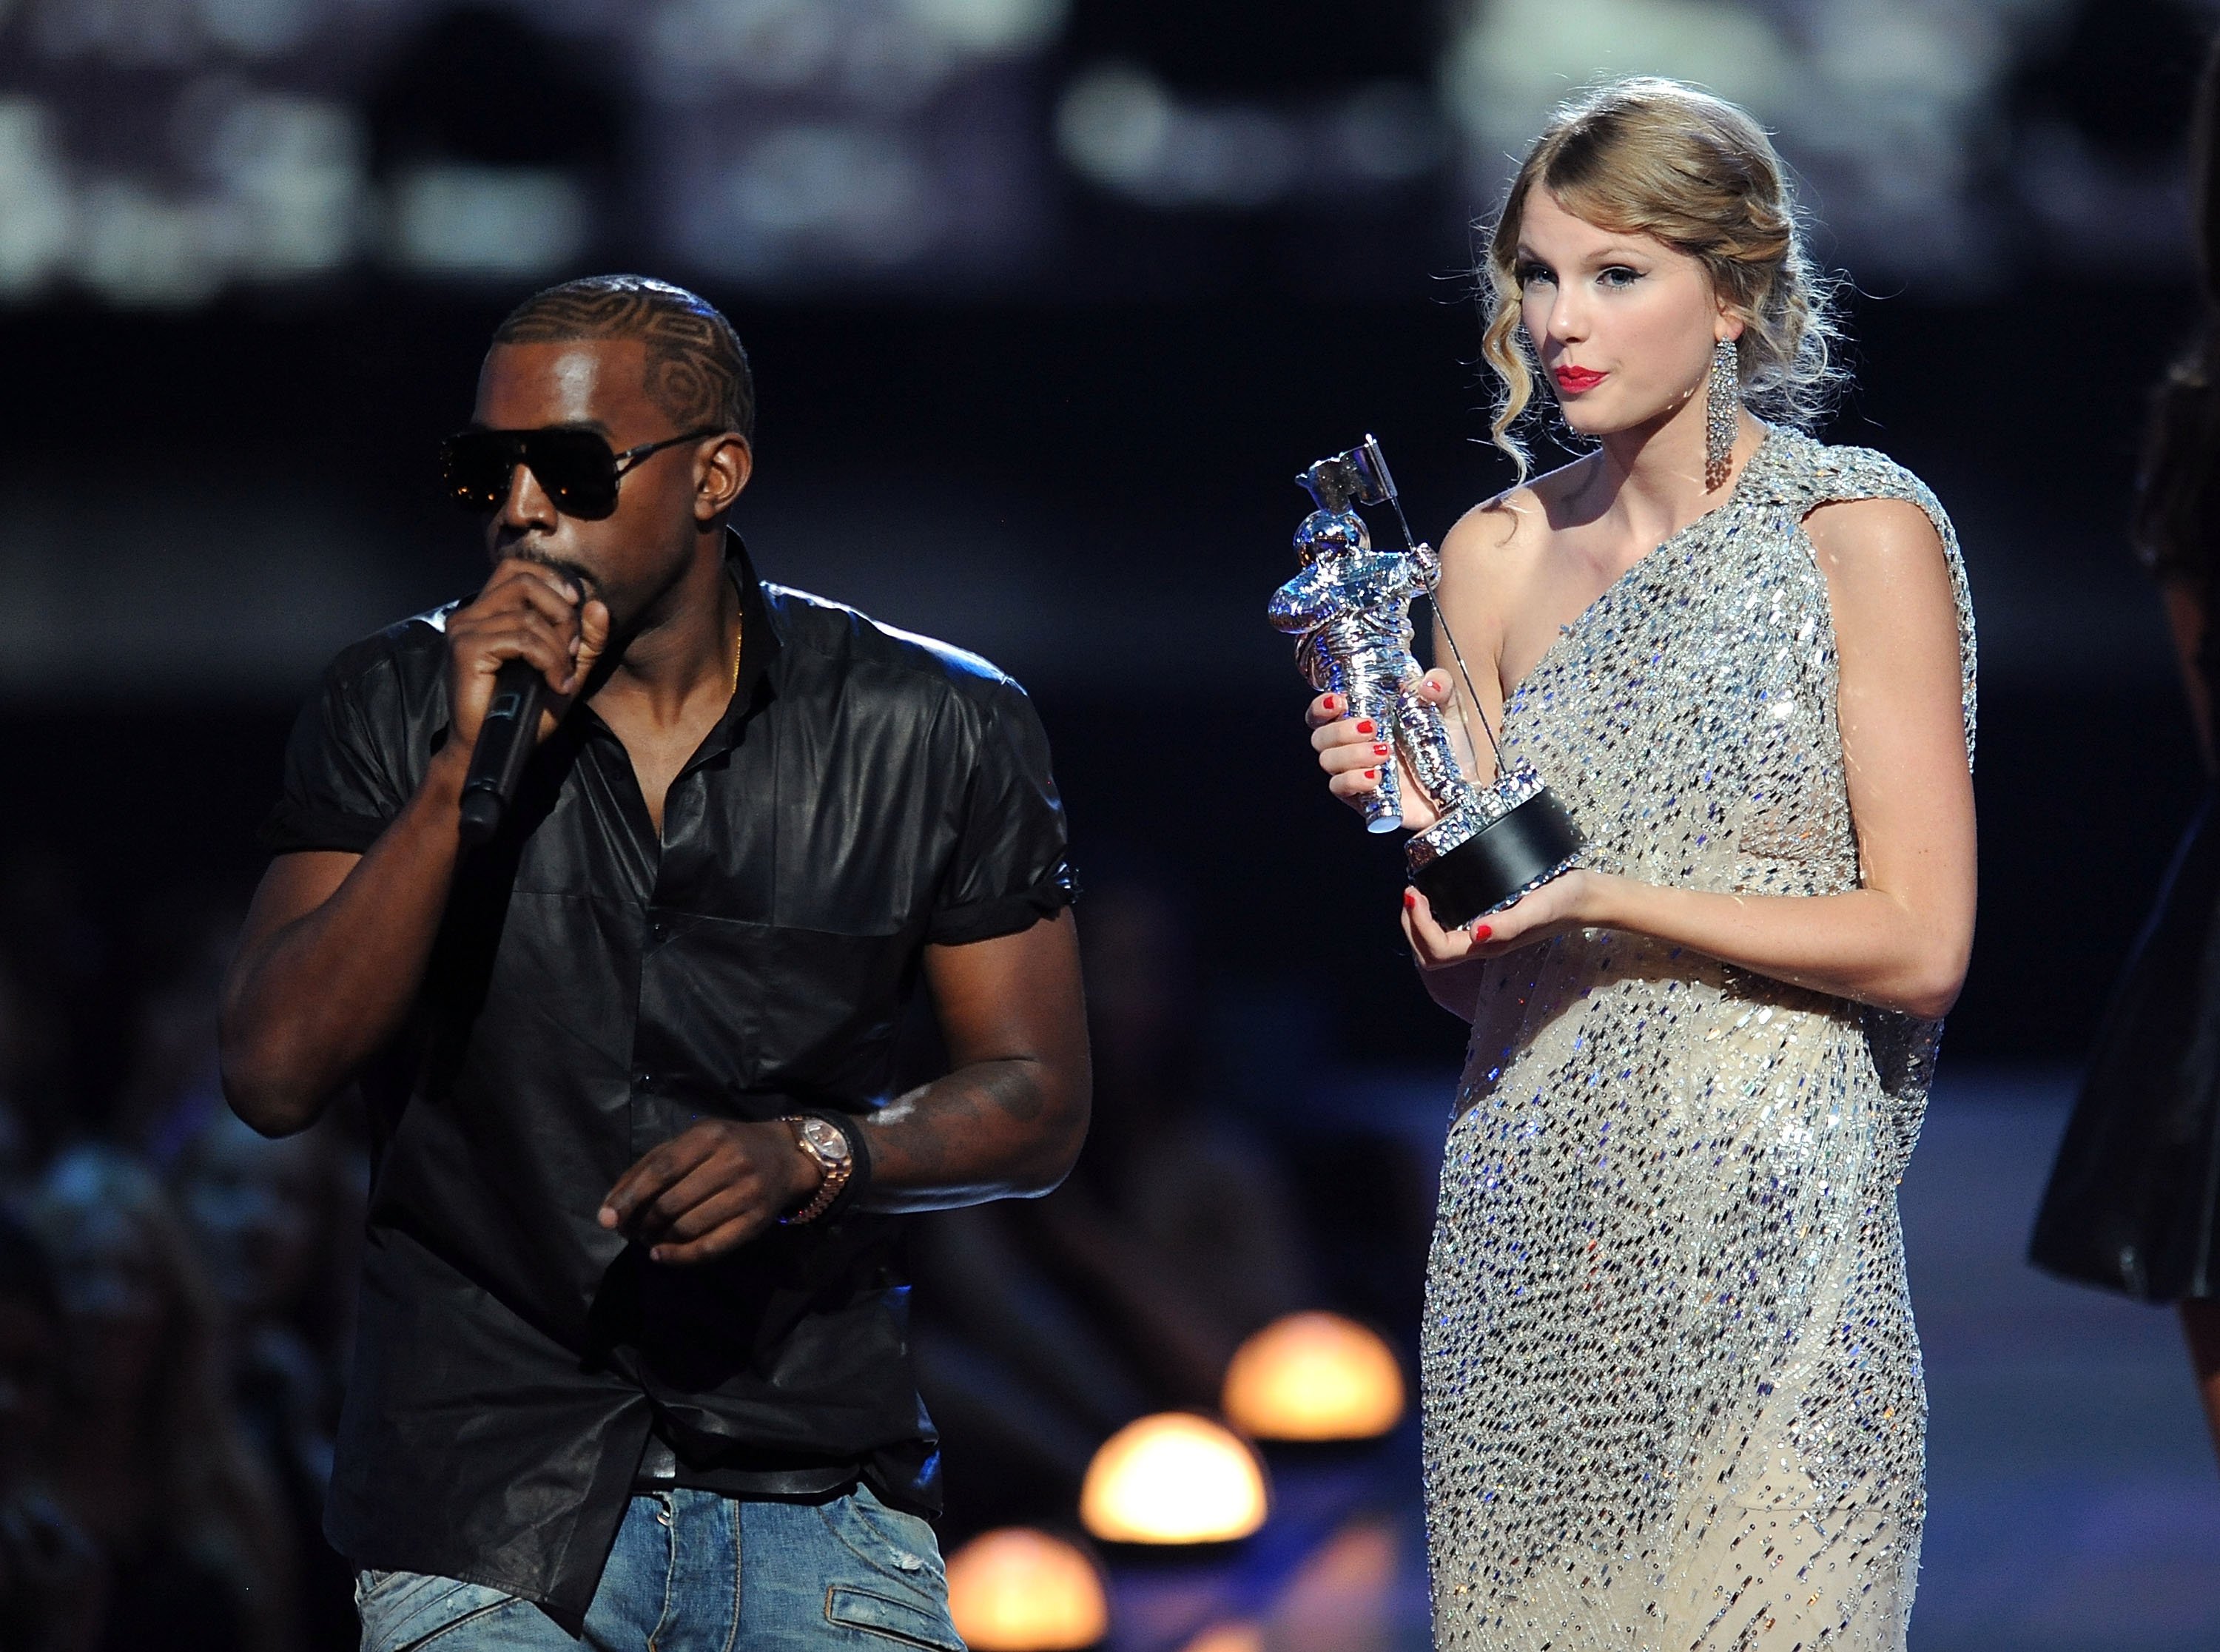 Kanye West takes the microphone from Taylor Swift during the 2009 MTV Video Music Awards on September 13, 2009 in New York City.